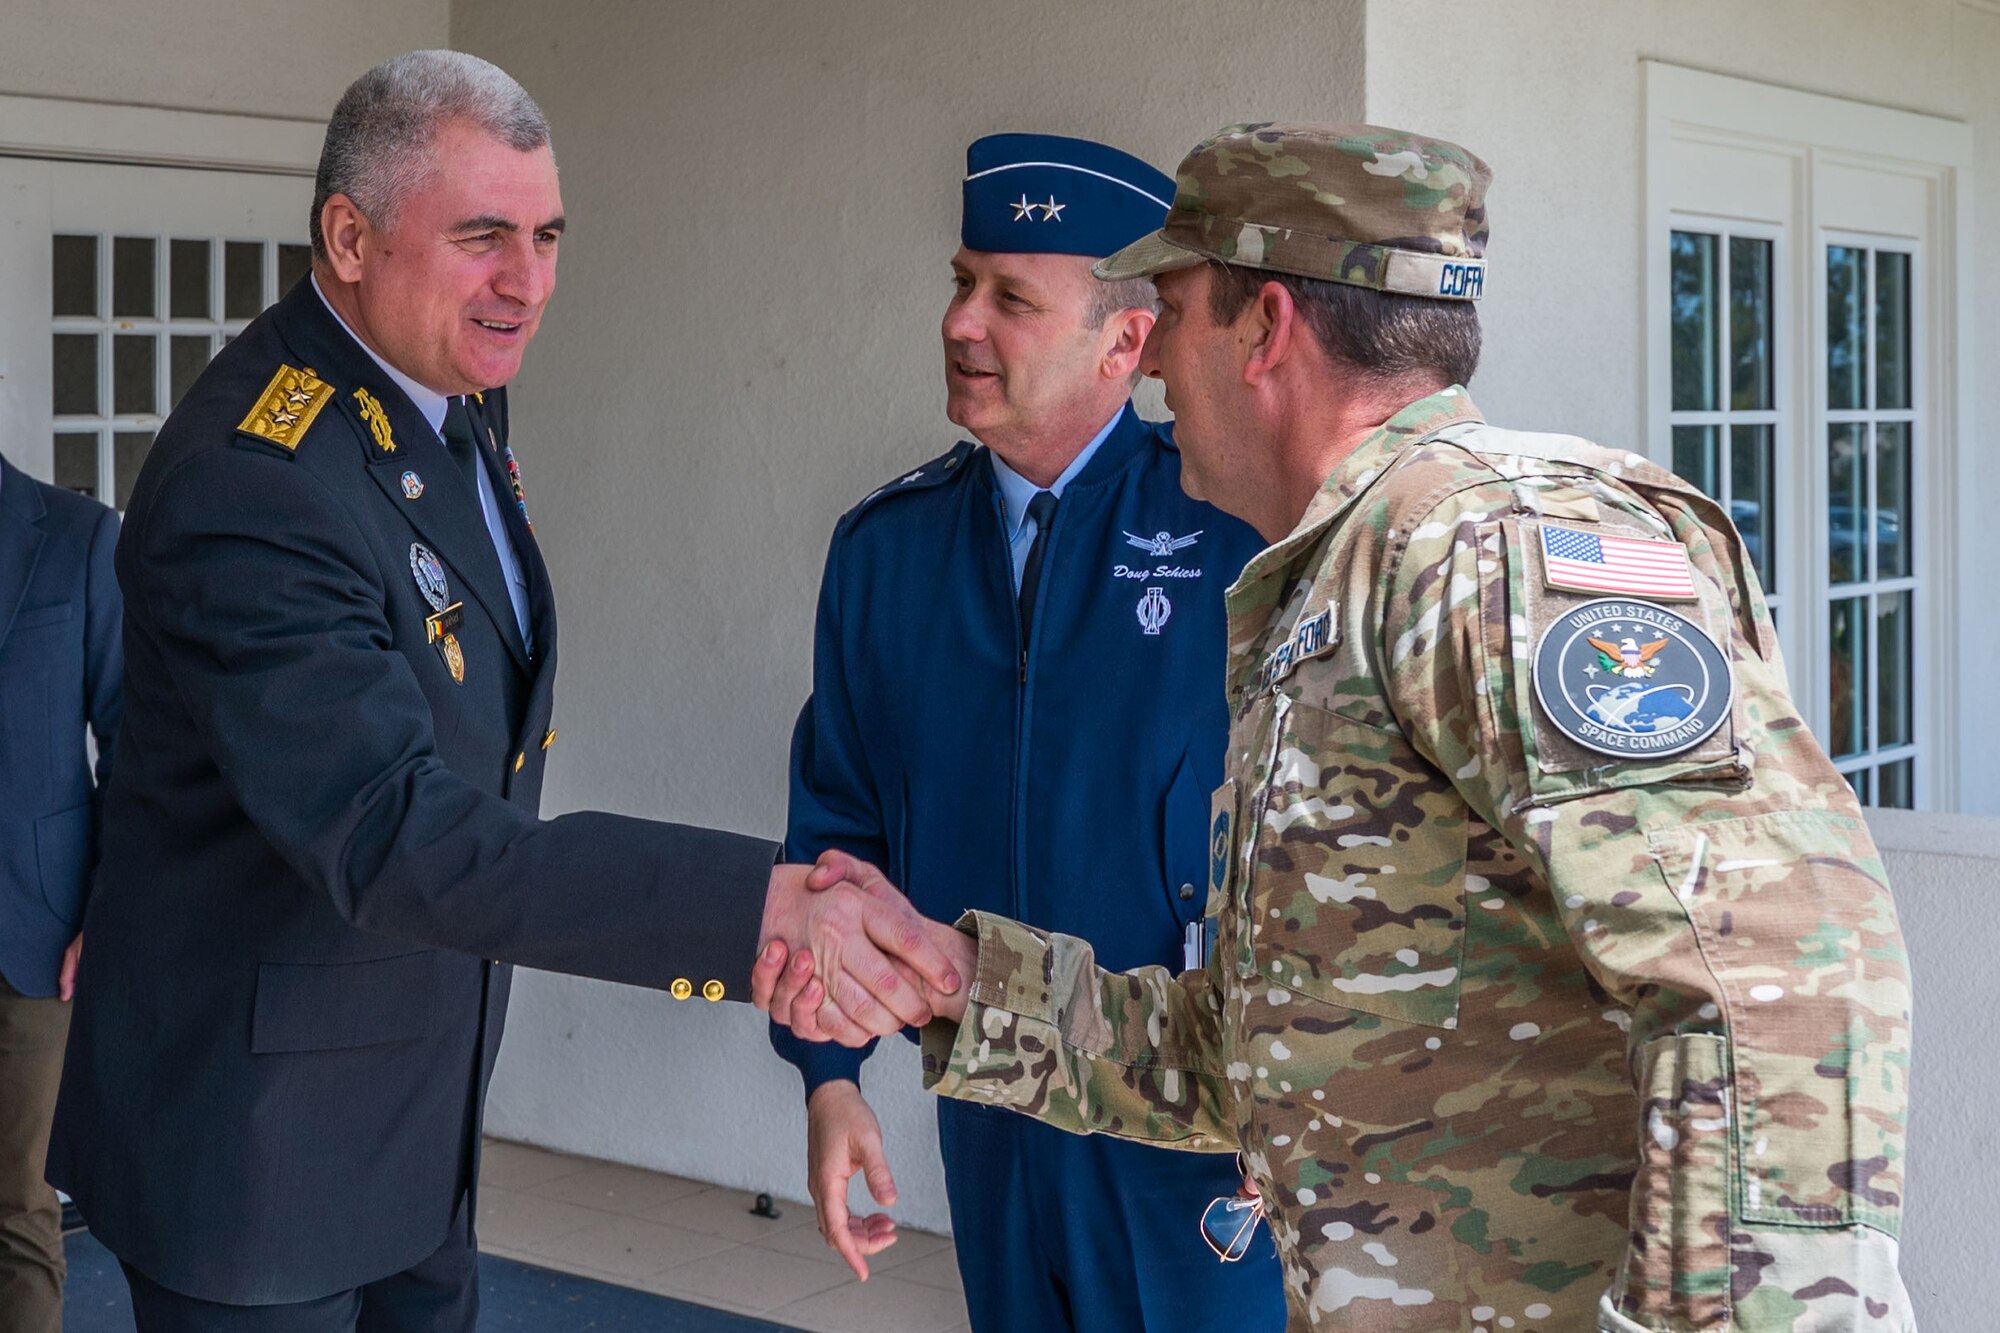 Maj. Gen. Adrian Brînză, Romanian Communications and Information Command commander, left, greets U.S. Space Force Maj. Gen. Douglas A. Schiess, Combined Force Space Component Command (CFSCC) commander, middle, and U.S. Space Force Chief Master Sgt. Grange S. Coffin, CFSCC senior enlisted leader, in front of the Pacific Coast Club on Vandenberg Space Force Base, Calif., April 25, 2023. A total of five Romanian representatives, two from
the Communications and Information Command and three from the Romanian Space Agency, immersed with CFSCC representatives for a full day to discuss Space Domain Awareness, command and control space operations, and benefits of Space Sharing Agreements. (U.S. Space Force photo by Tech. Sgt. Luke Kitterman)